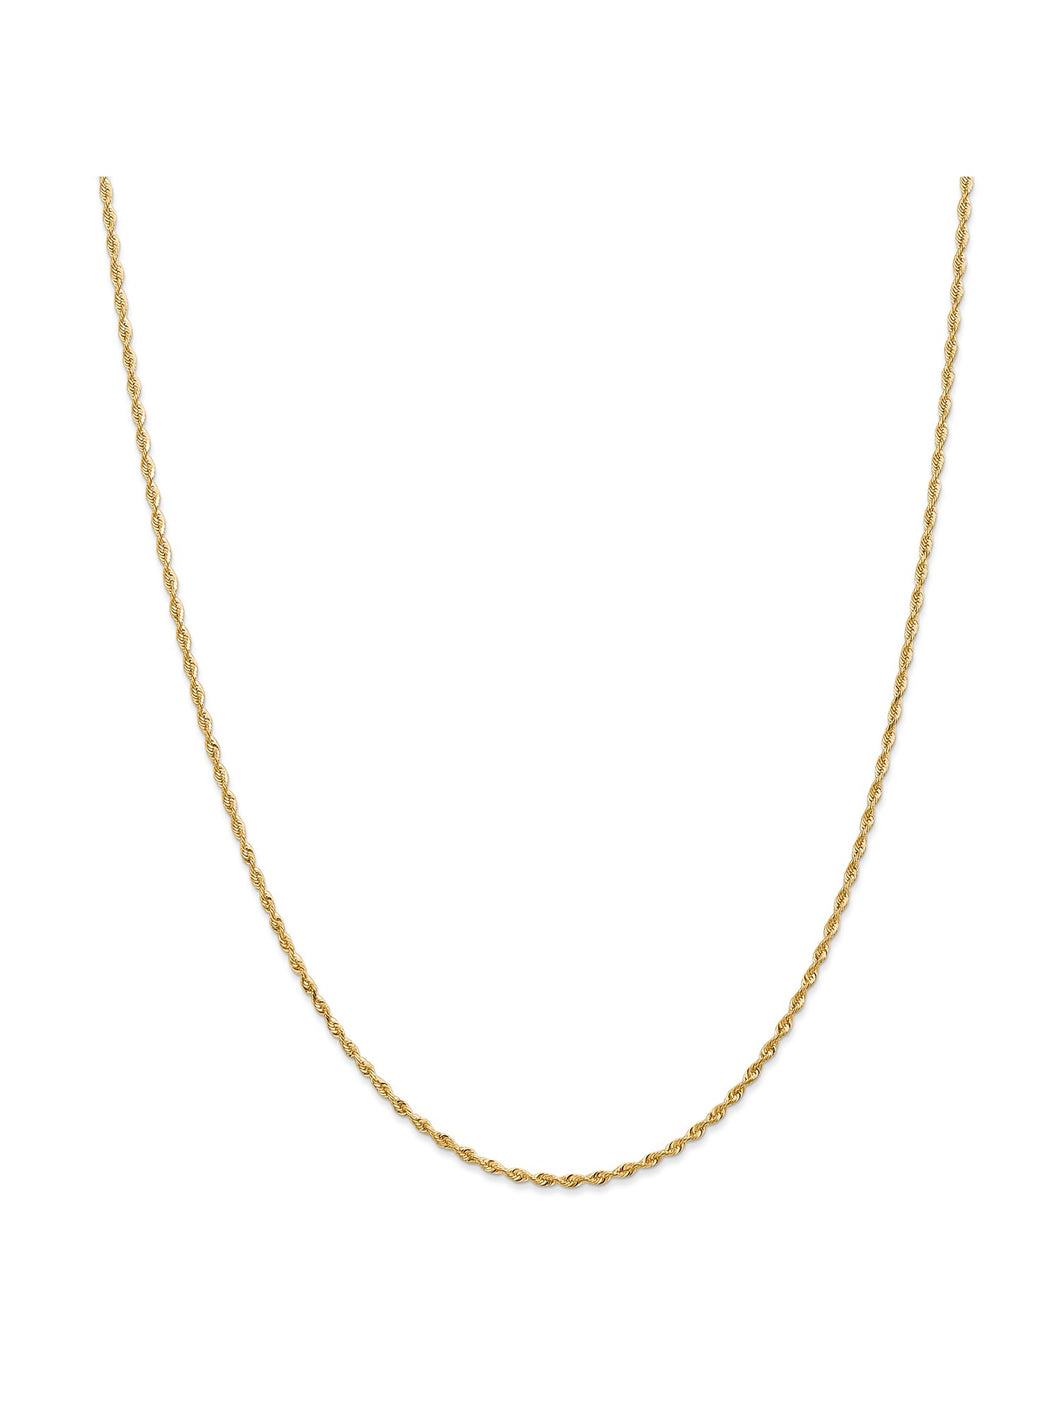 14k Yellow Gold 2mm Quadruple Rope Chain Necklace